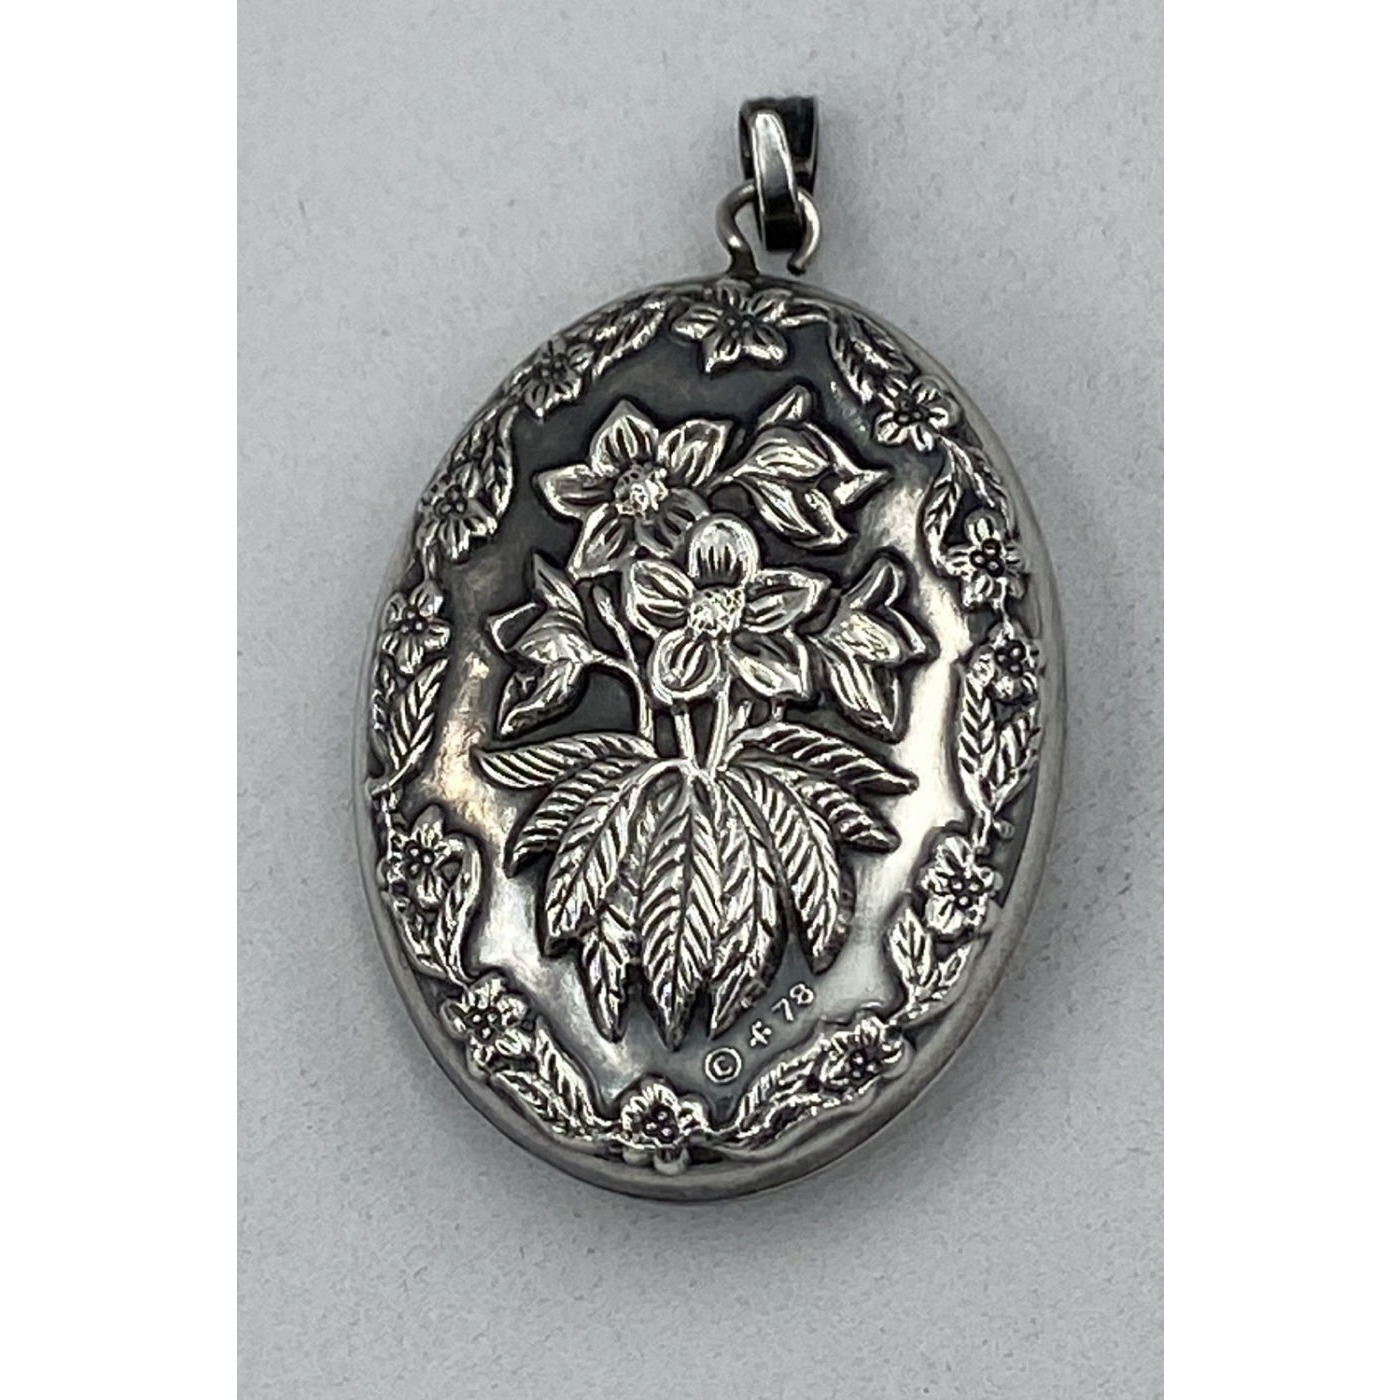 Lovely Floral Victorian English Silver Pendant